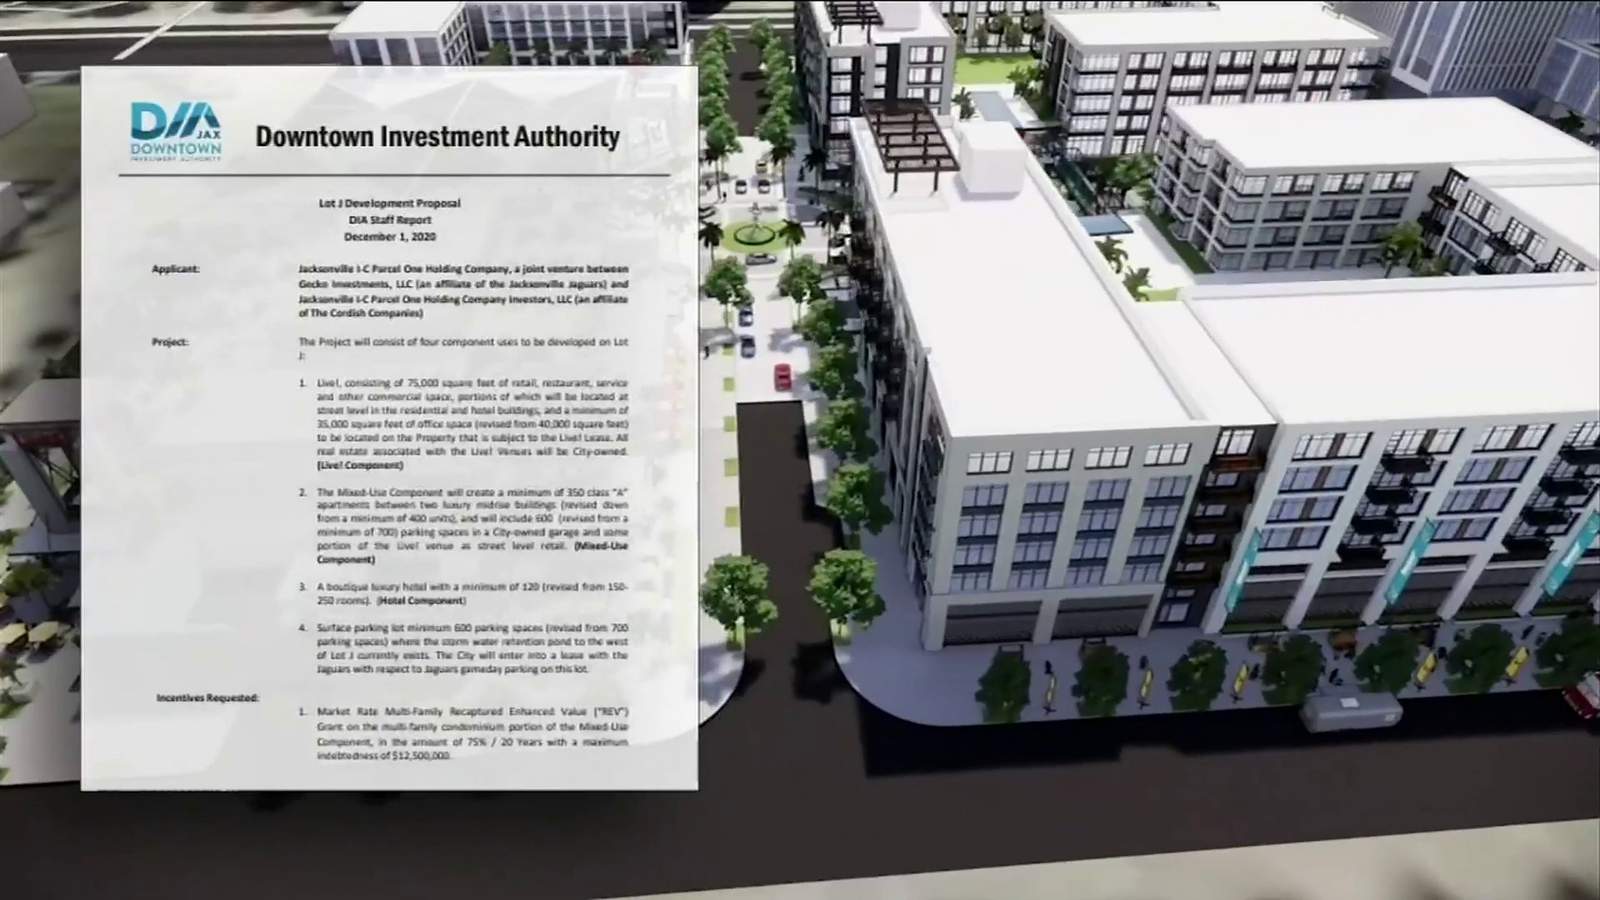 Downtown Investment Authority recommends approving Lot J ‘with some conditions’